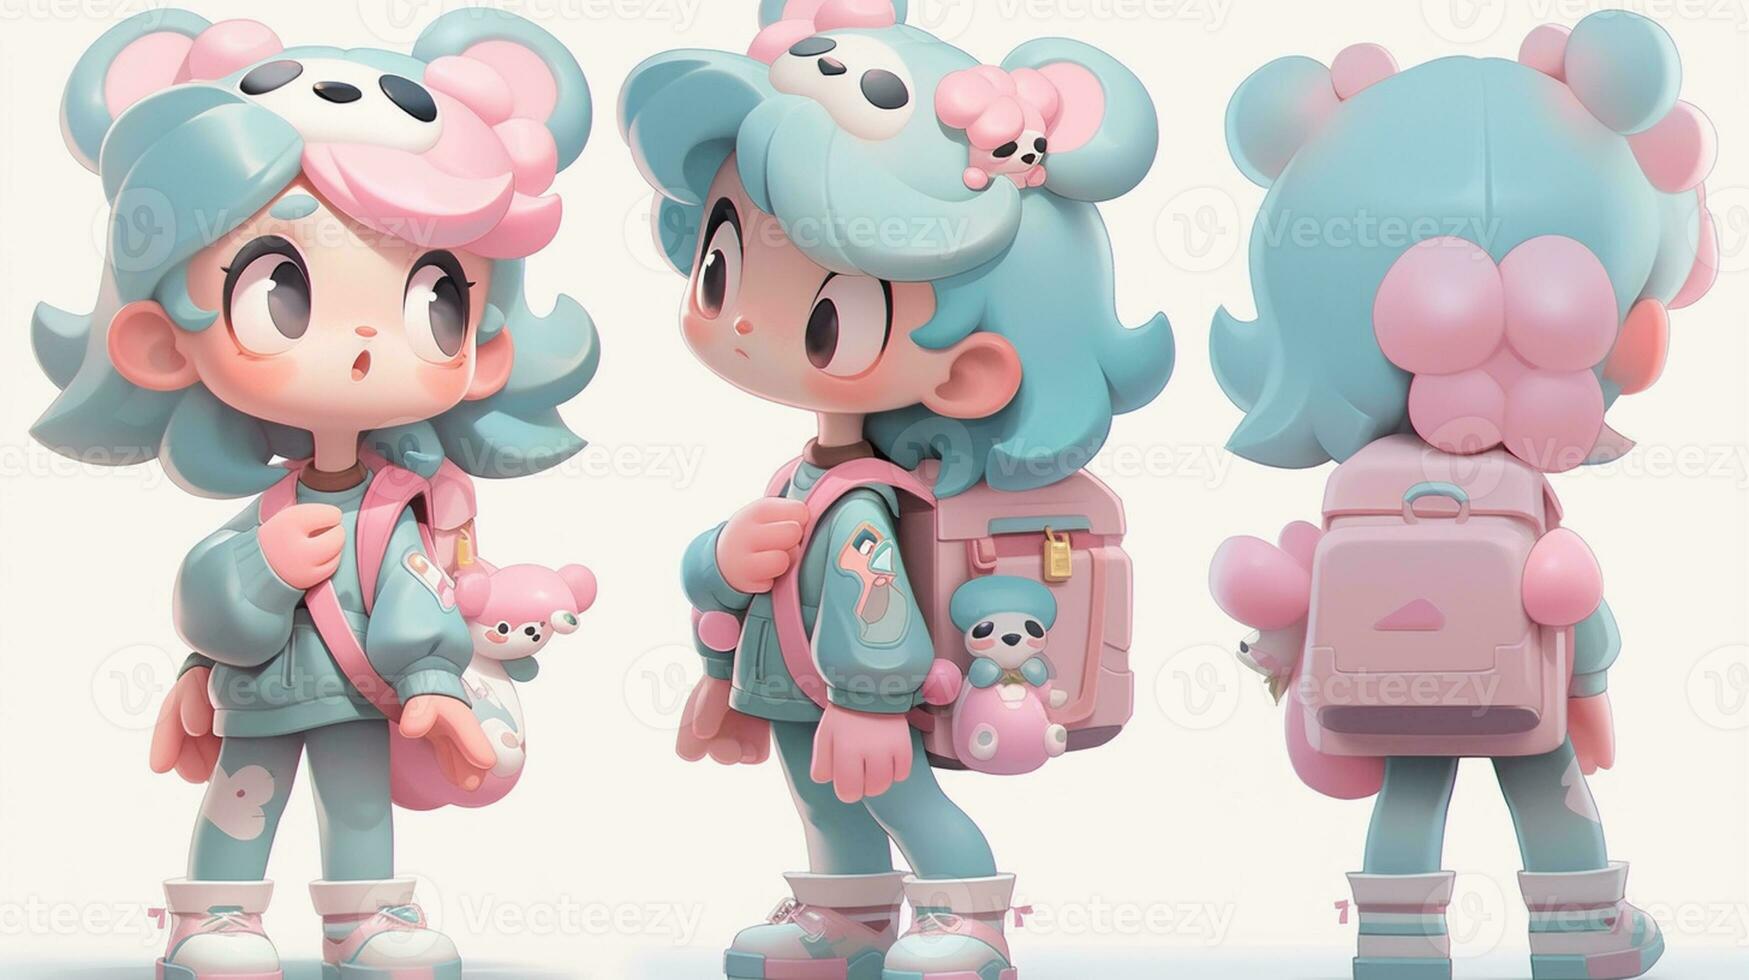 anime character with backpack and teddy bear in different poses